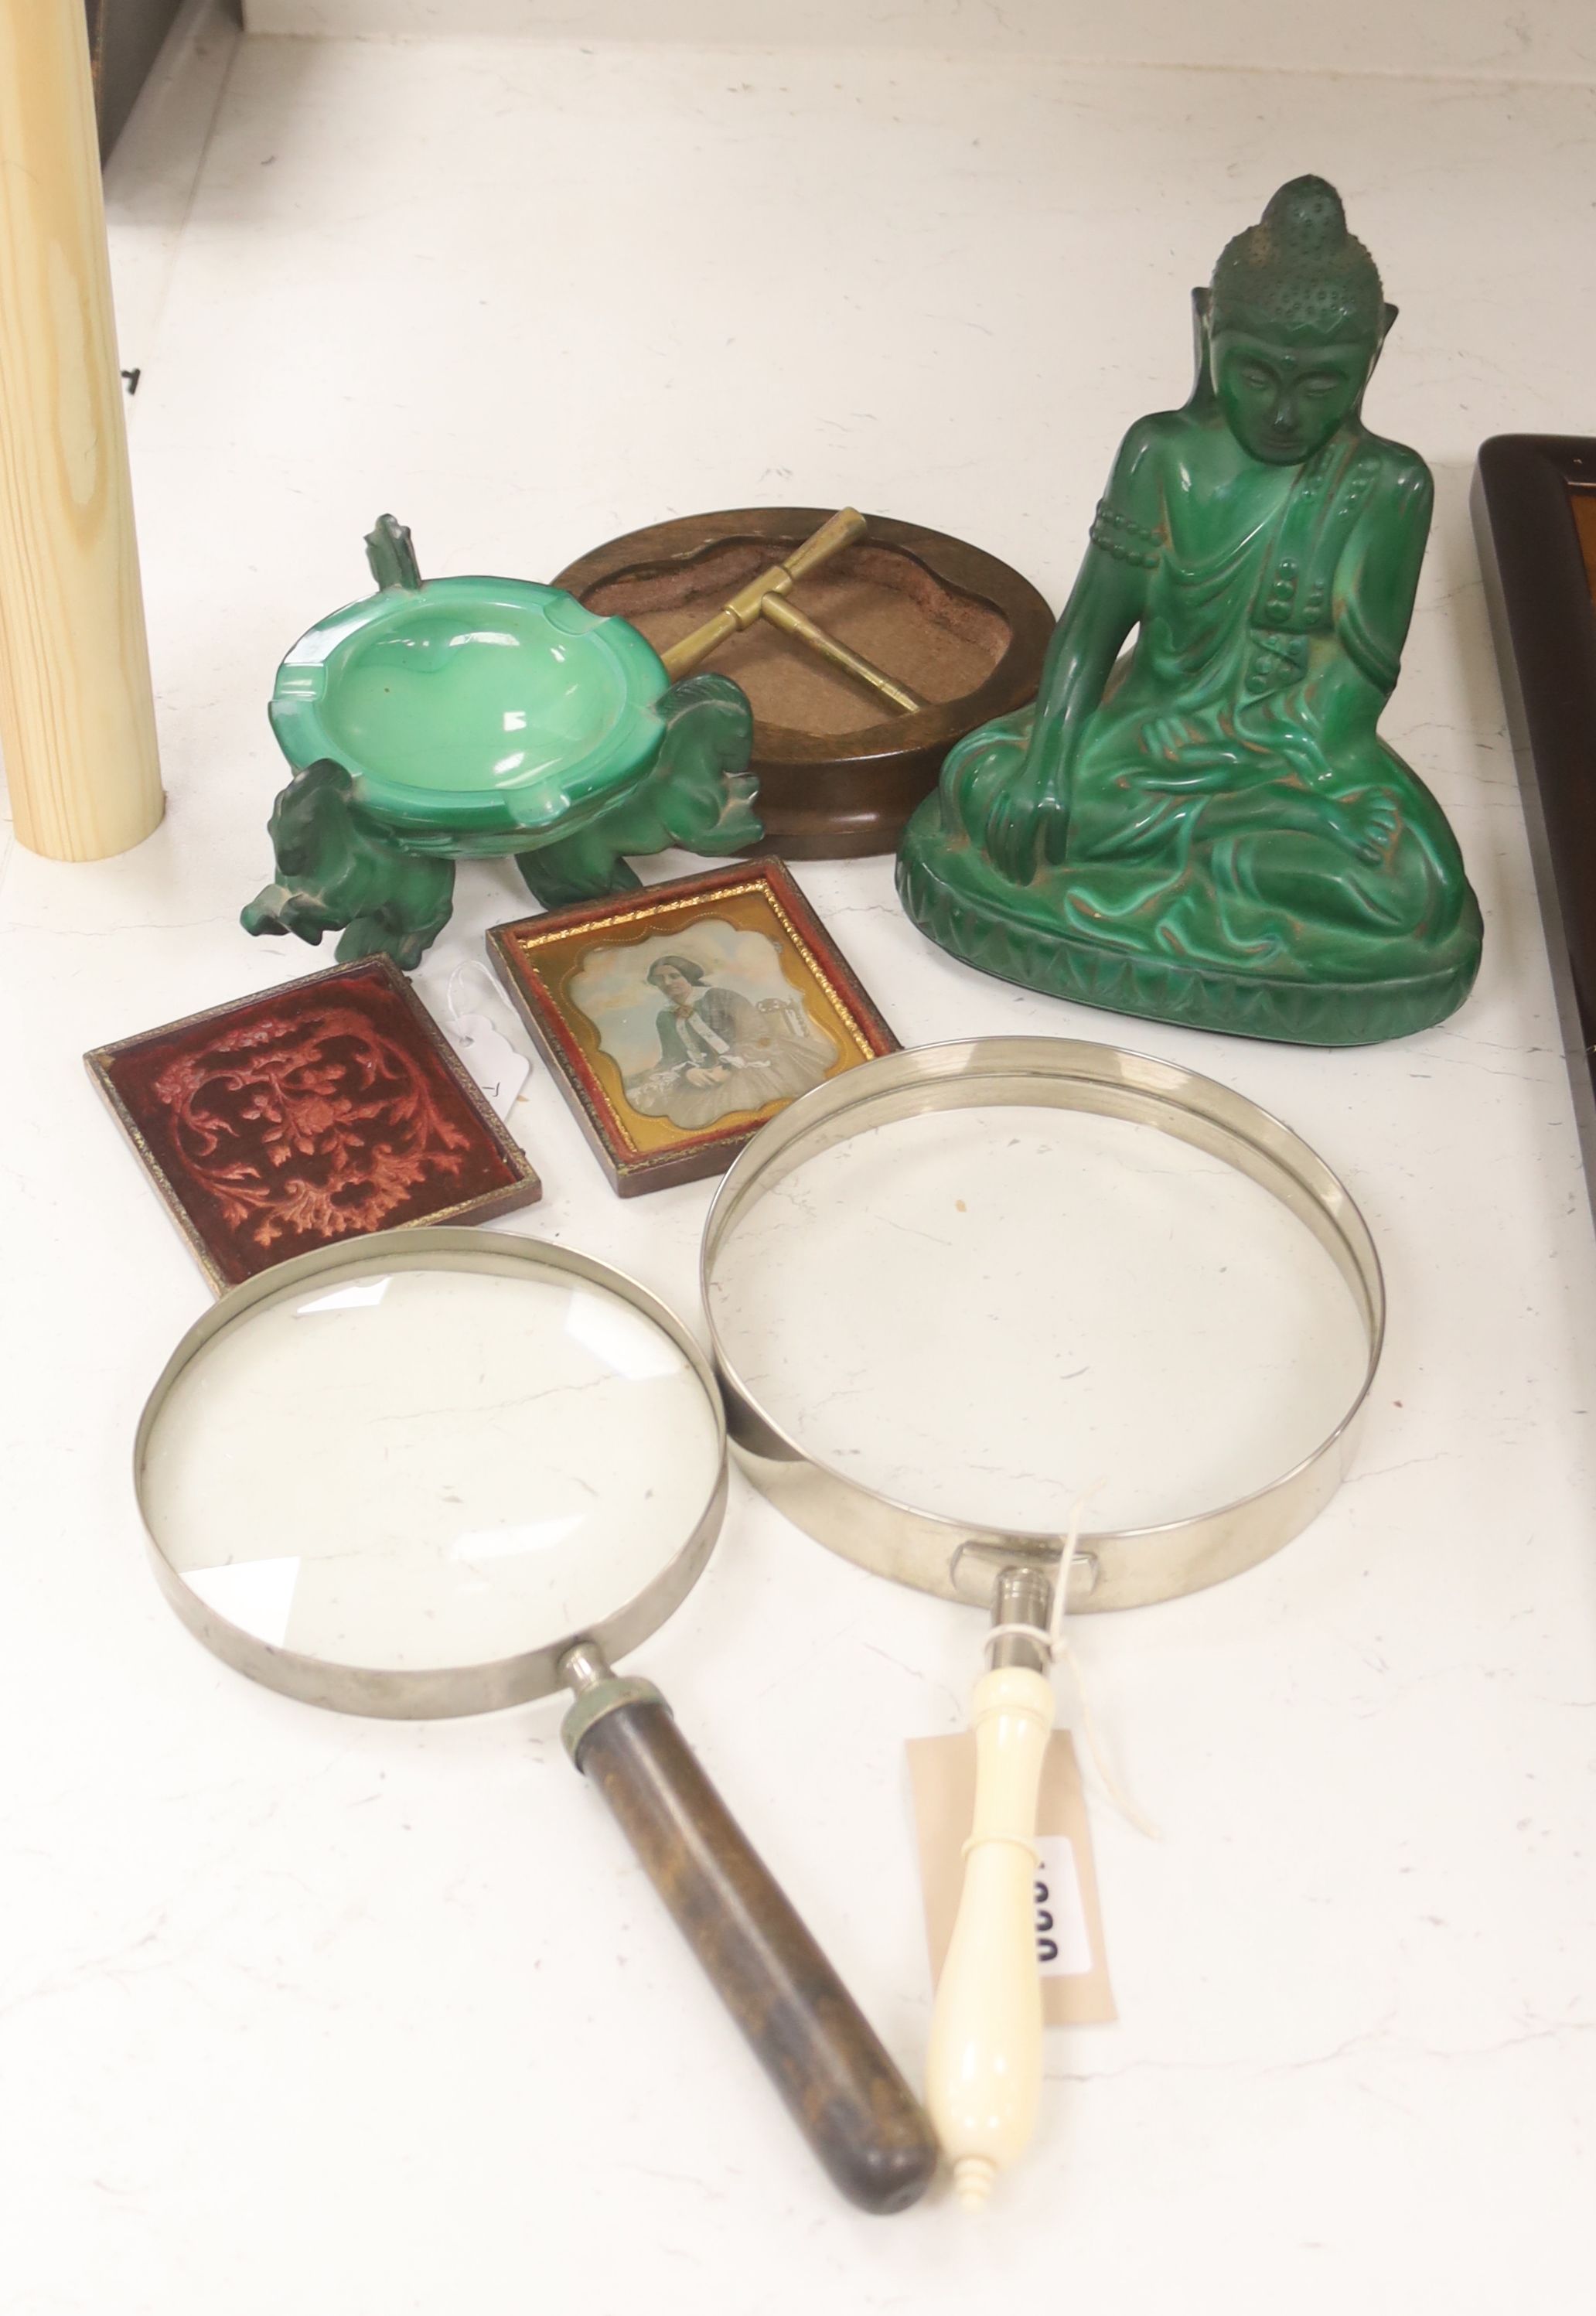 A French Art Deco green glass ashtray, a similar green glass Buddha, two magnifying glasses and a Daguerreotype portrait of a Victorian lady